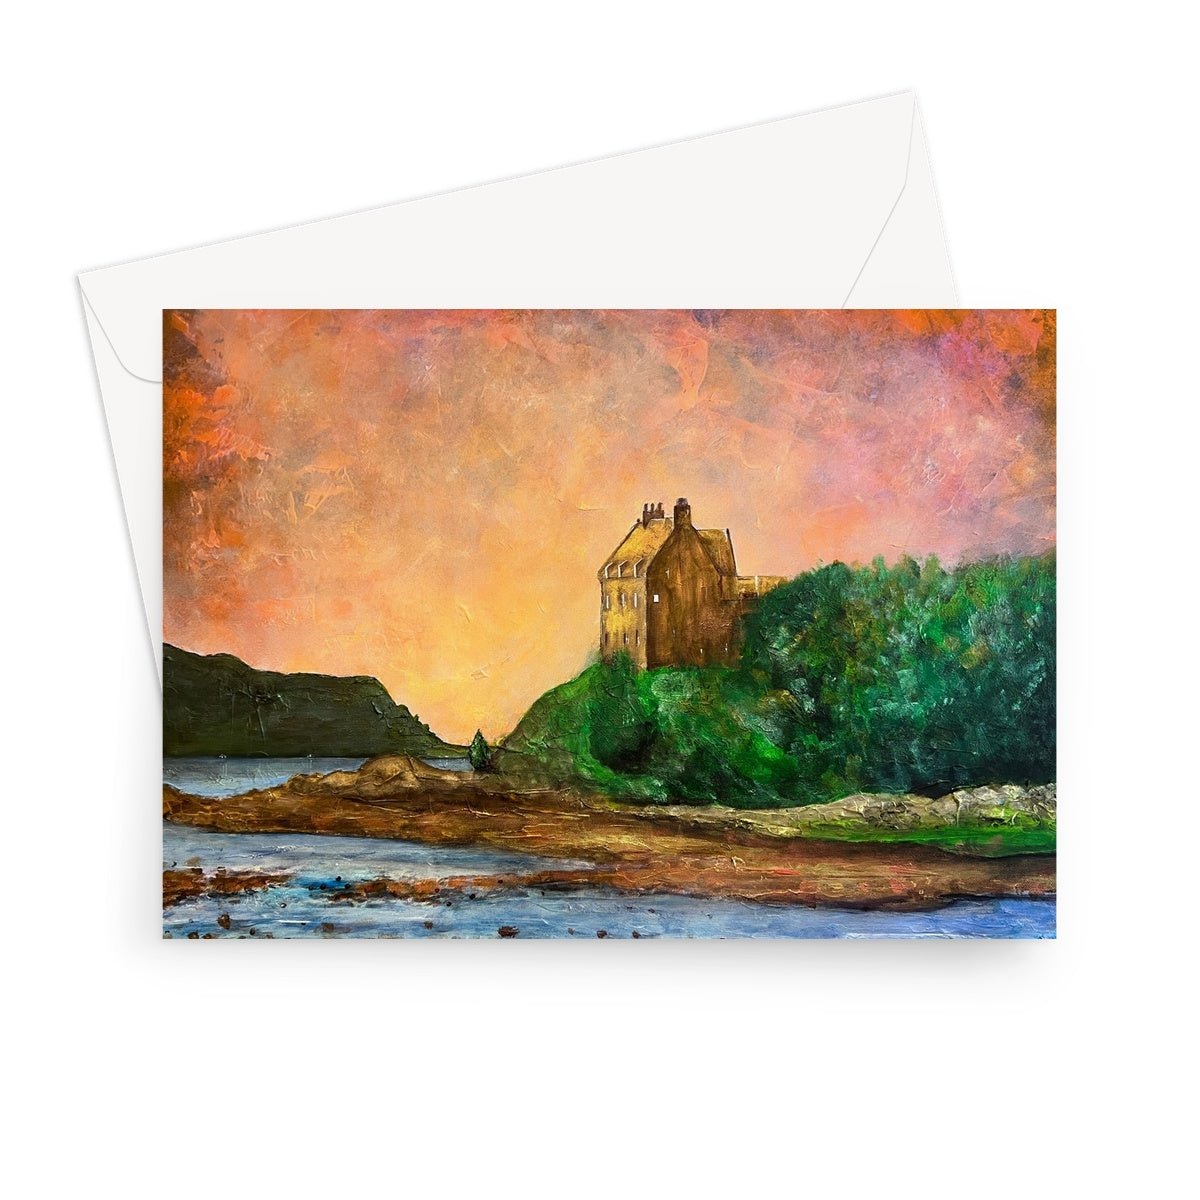 Duntrune Castle Art Gifts Greeting Card-Greetings Cards-Scottish Castles Art Gallery-7"x5"-10 Cards-Paintings, Prints, Homeware, Art Gifts From Scotland By Scottish Artist Kevin Hunter